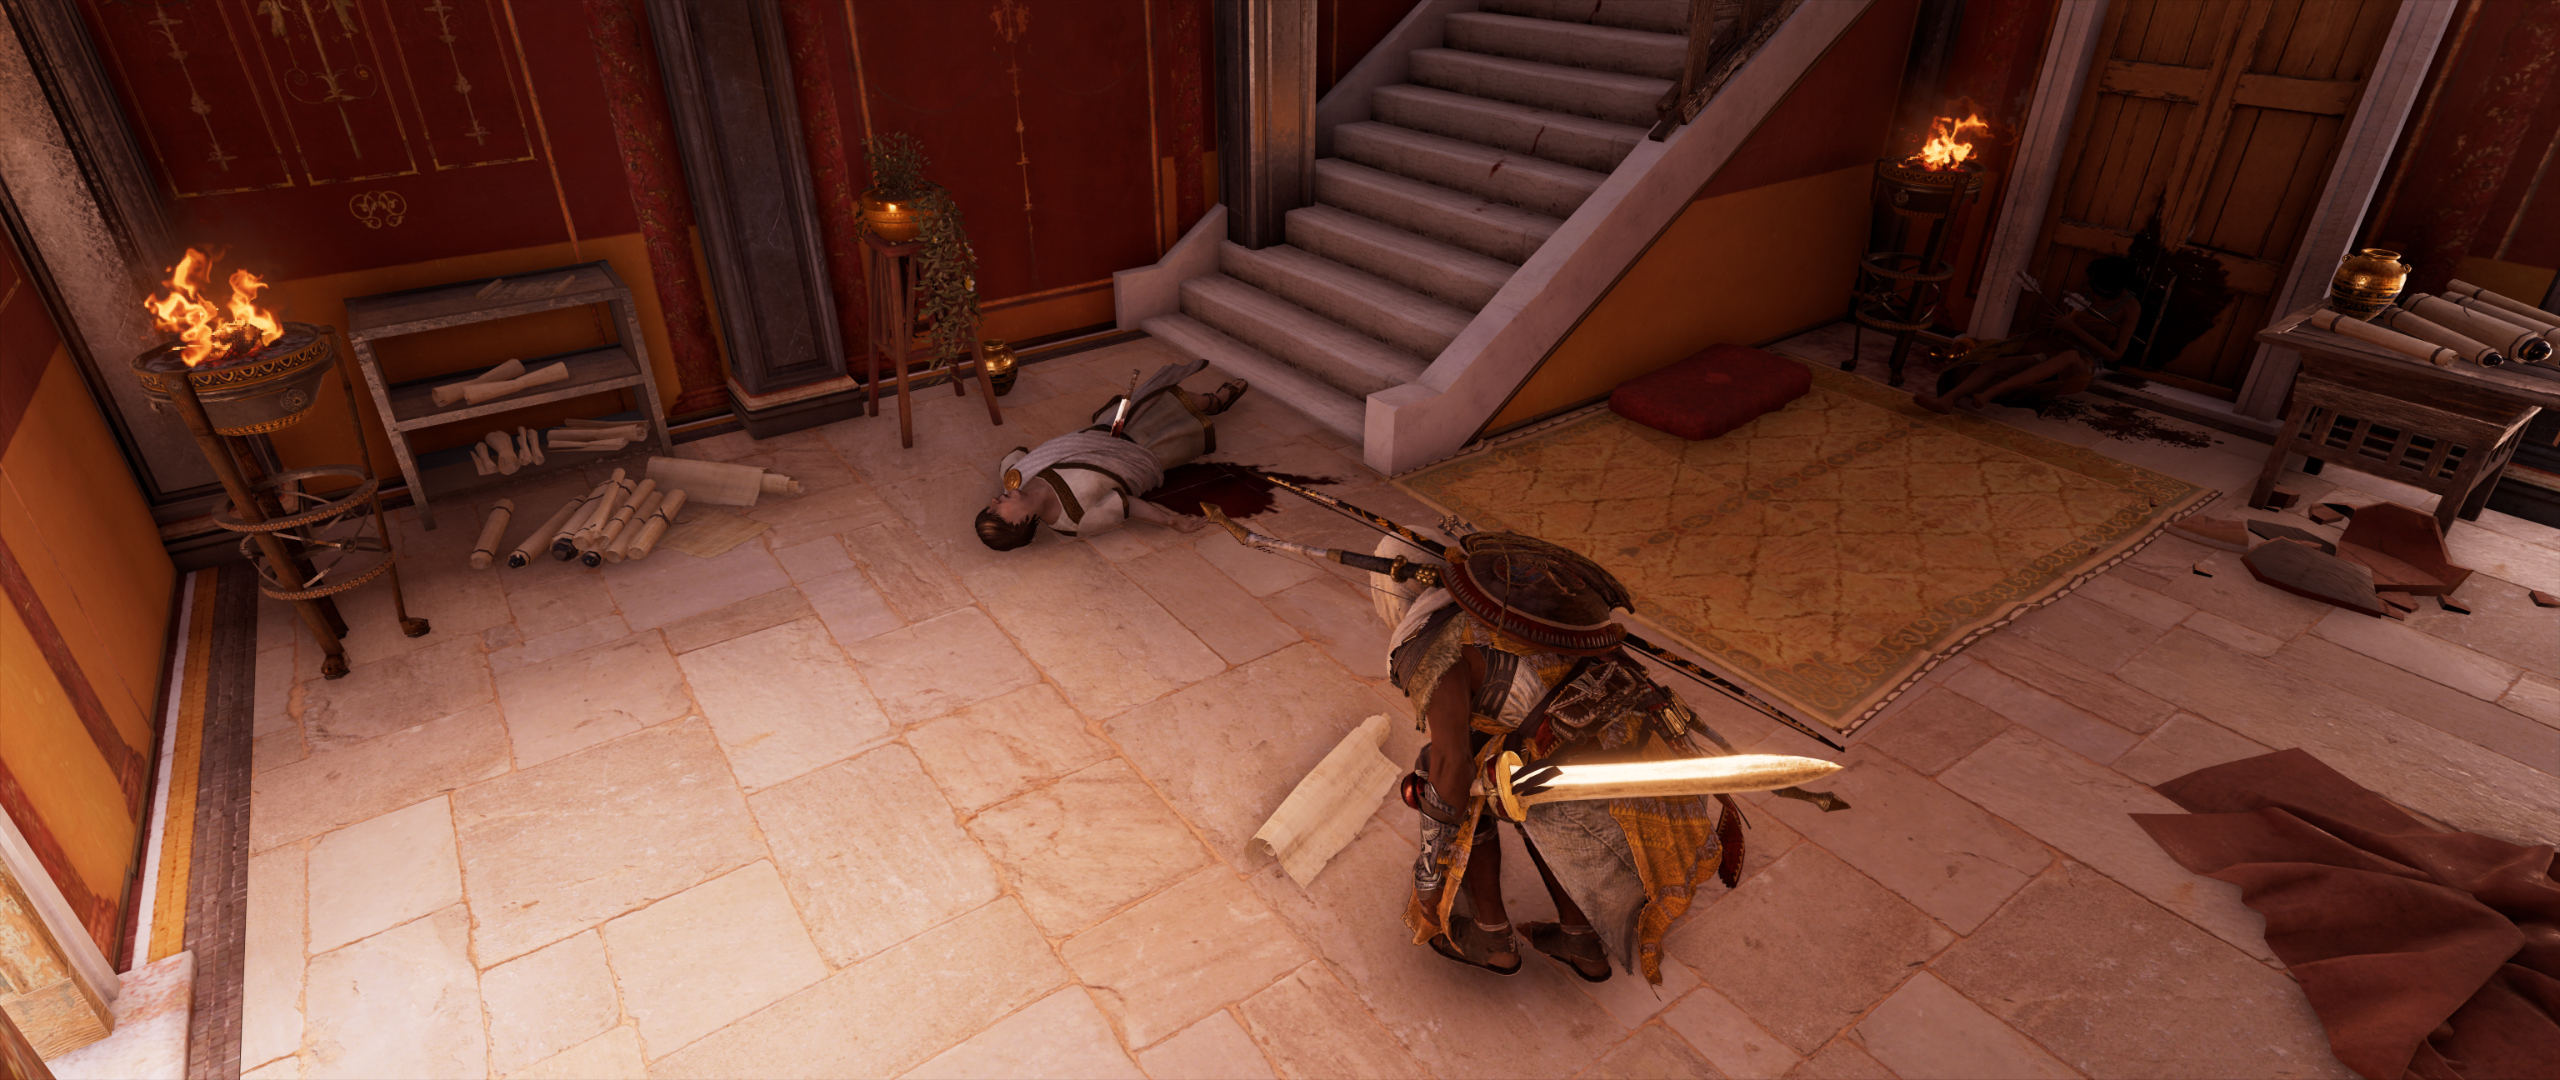 The original Assassin's Creed was an awkward, ambitious sign of things to  come